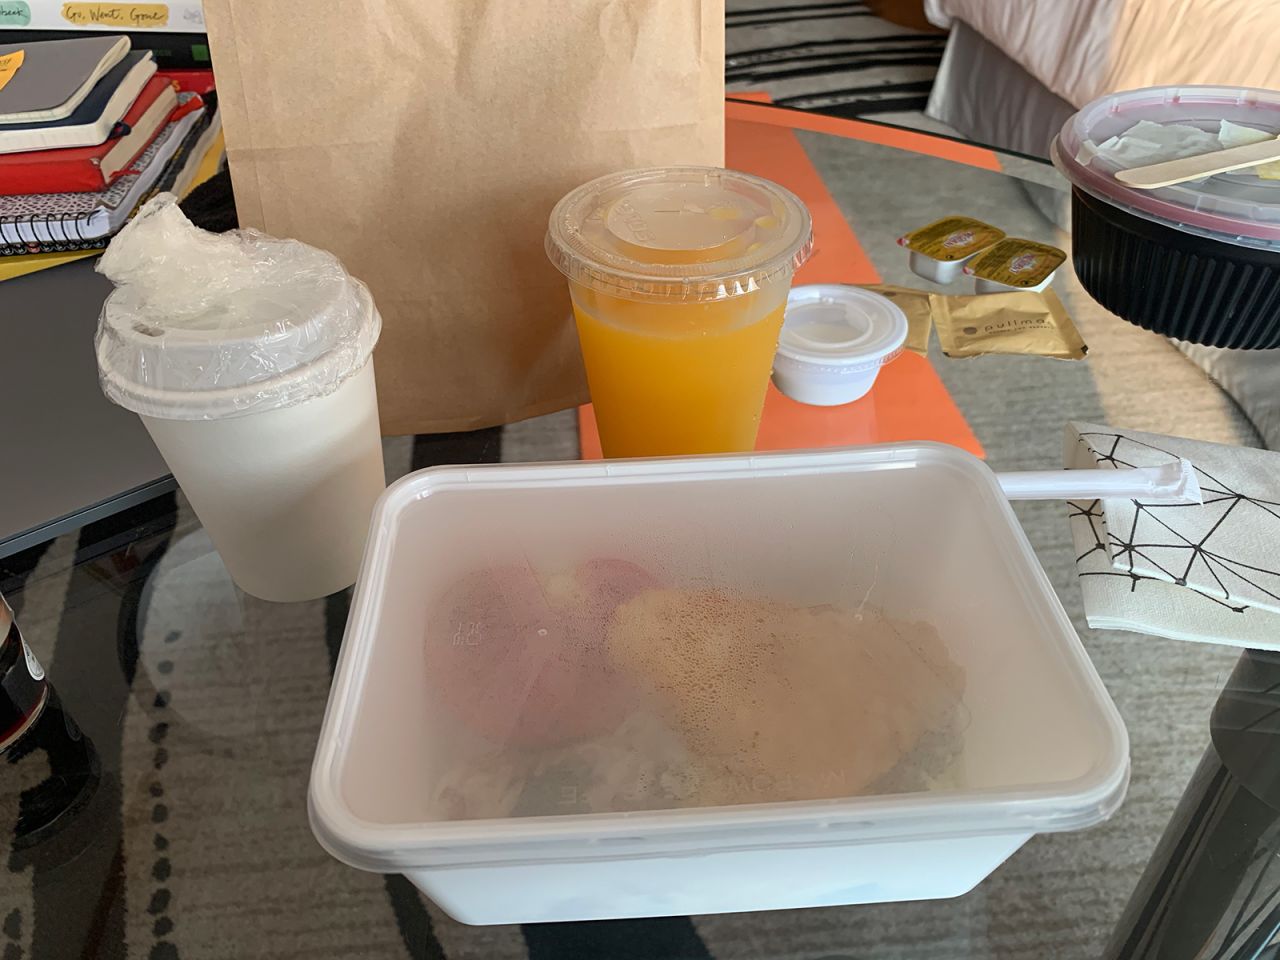 <strong>Eat it up:</strong> Meals and utensils were delivered to Tsui's room in individual plastic containers.